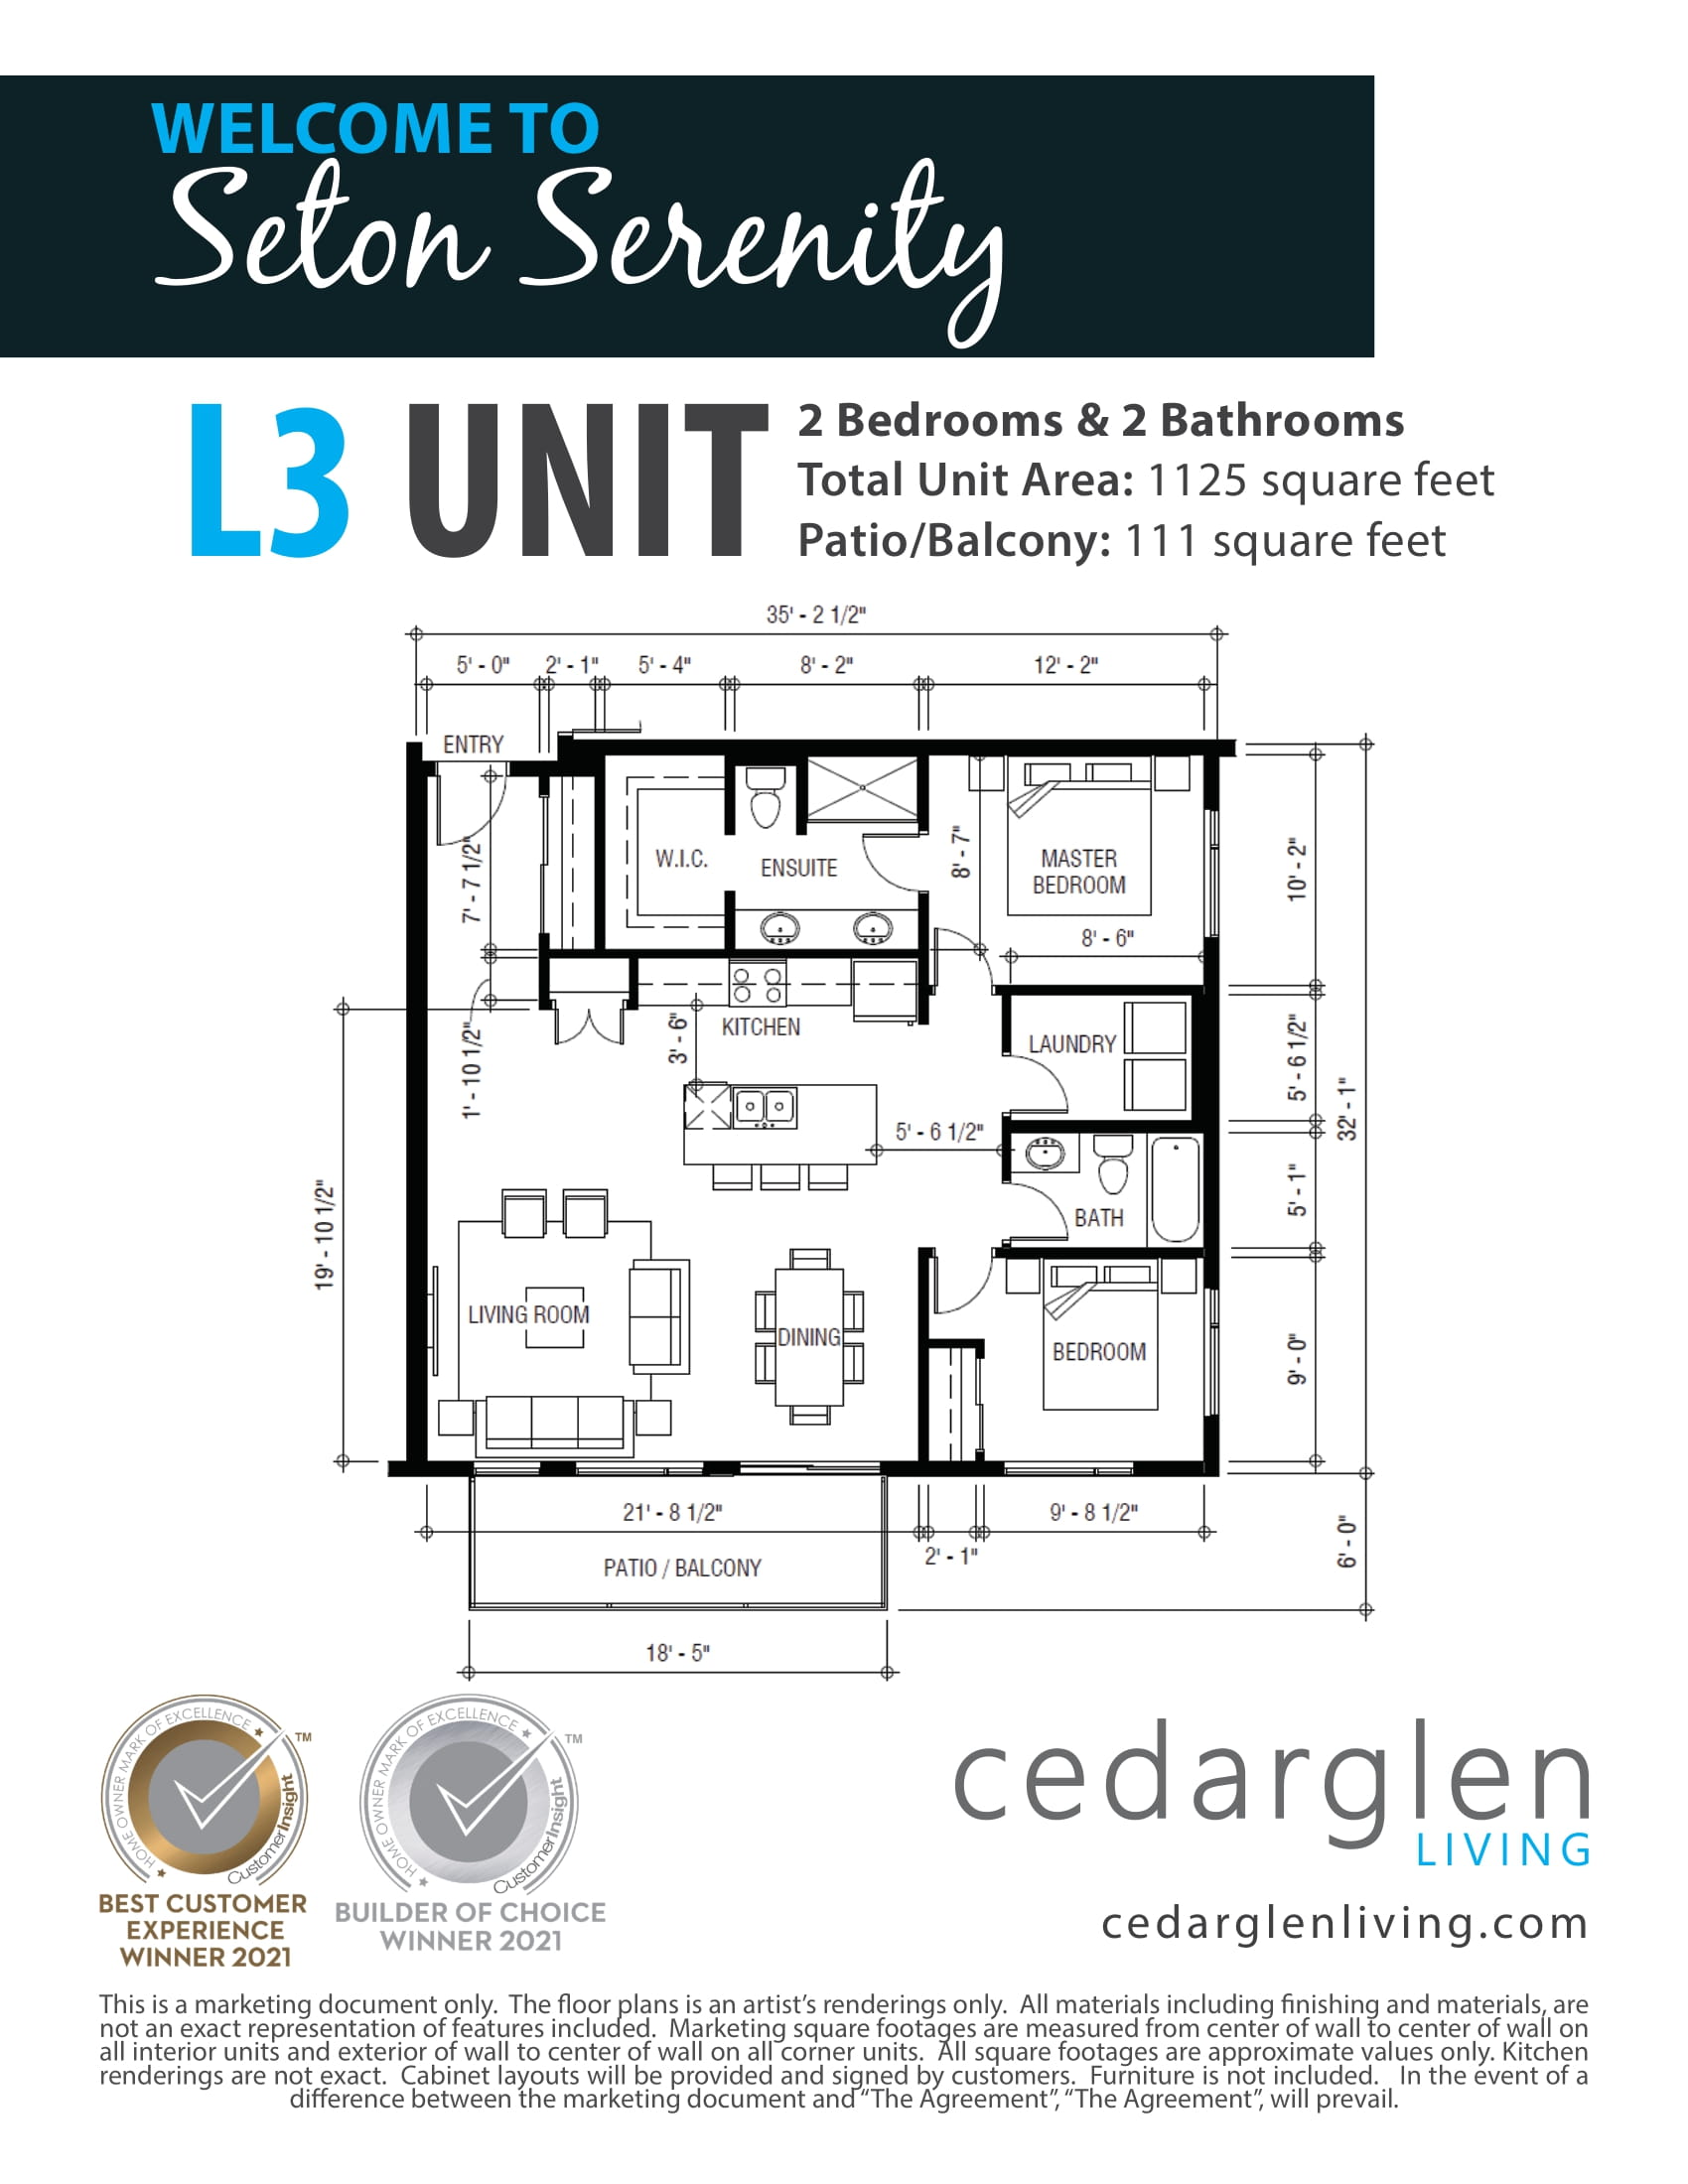  Floor Plan of Seton Serenity with undefined beds